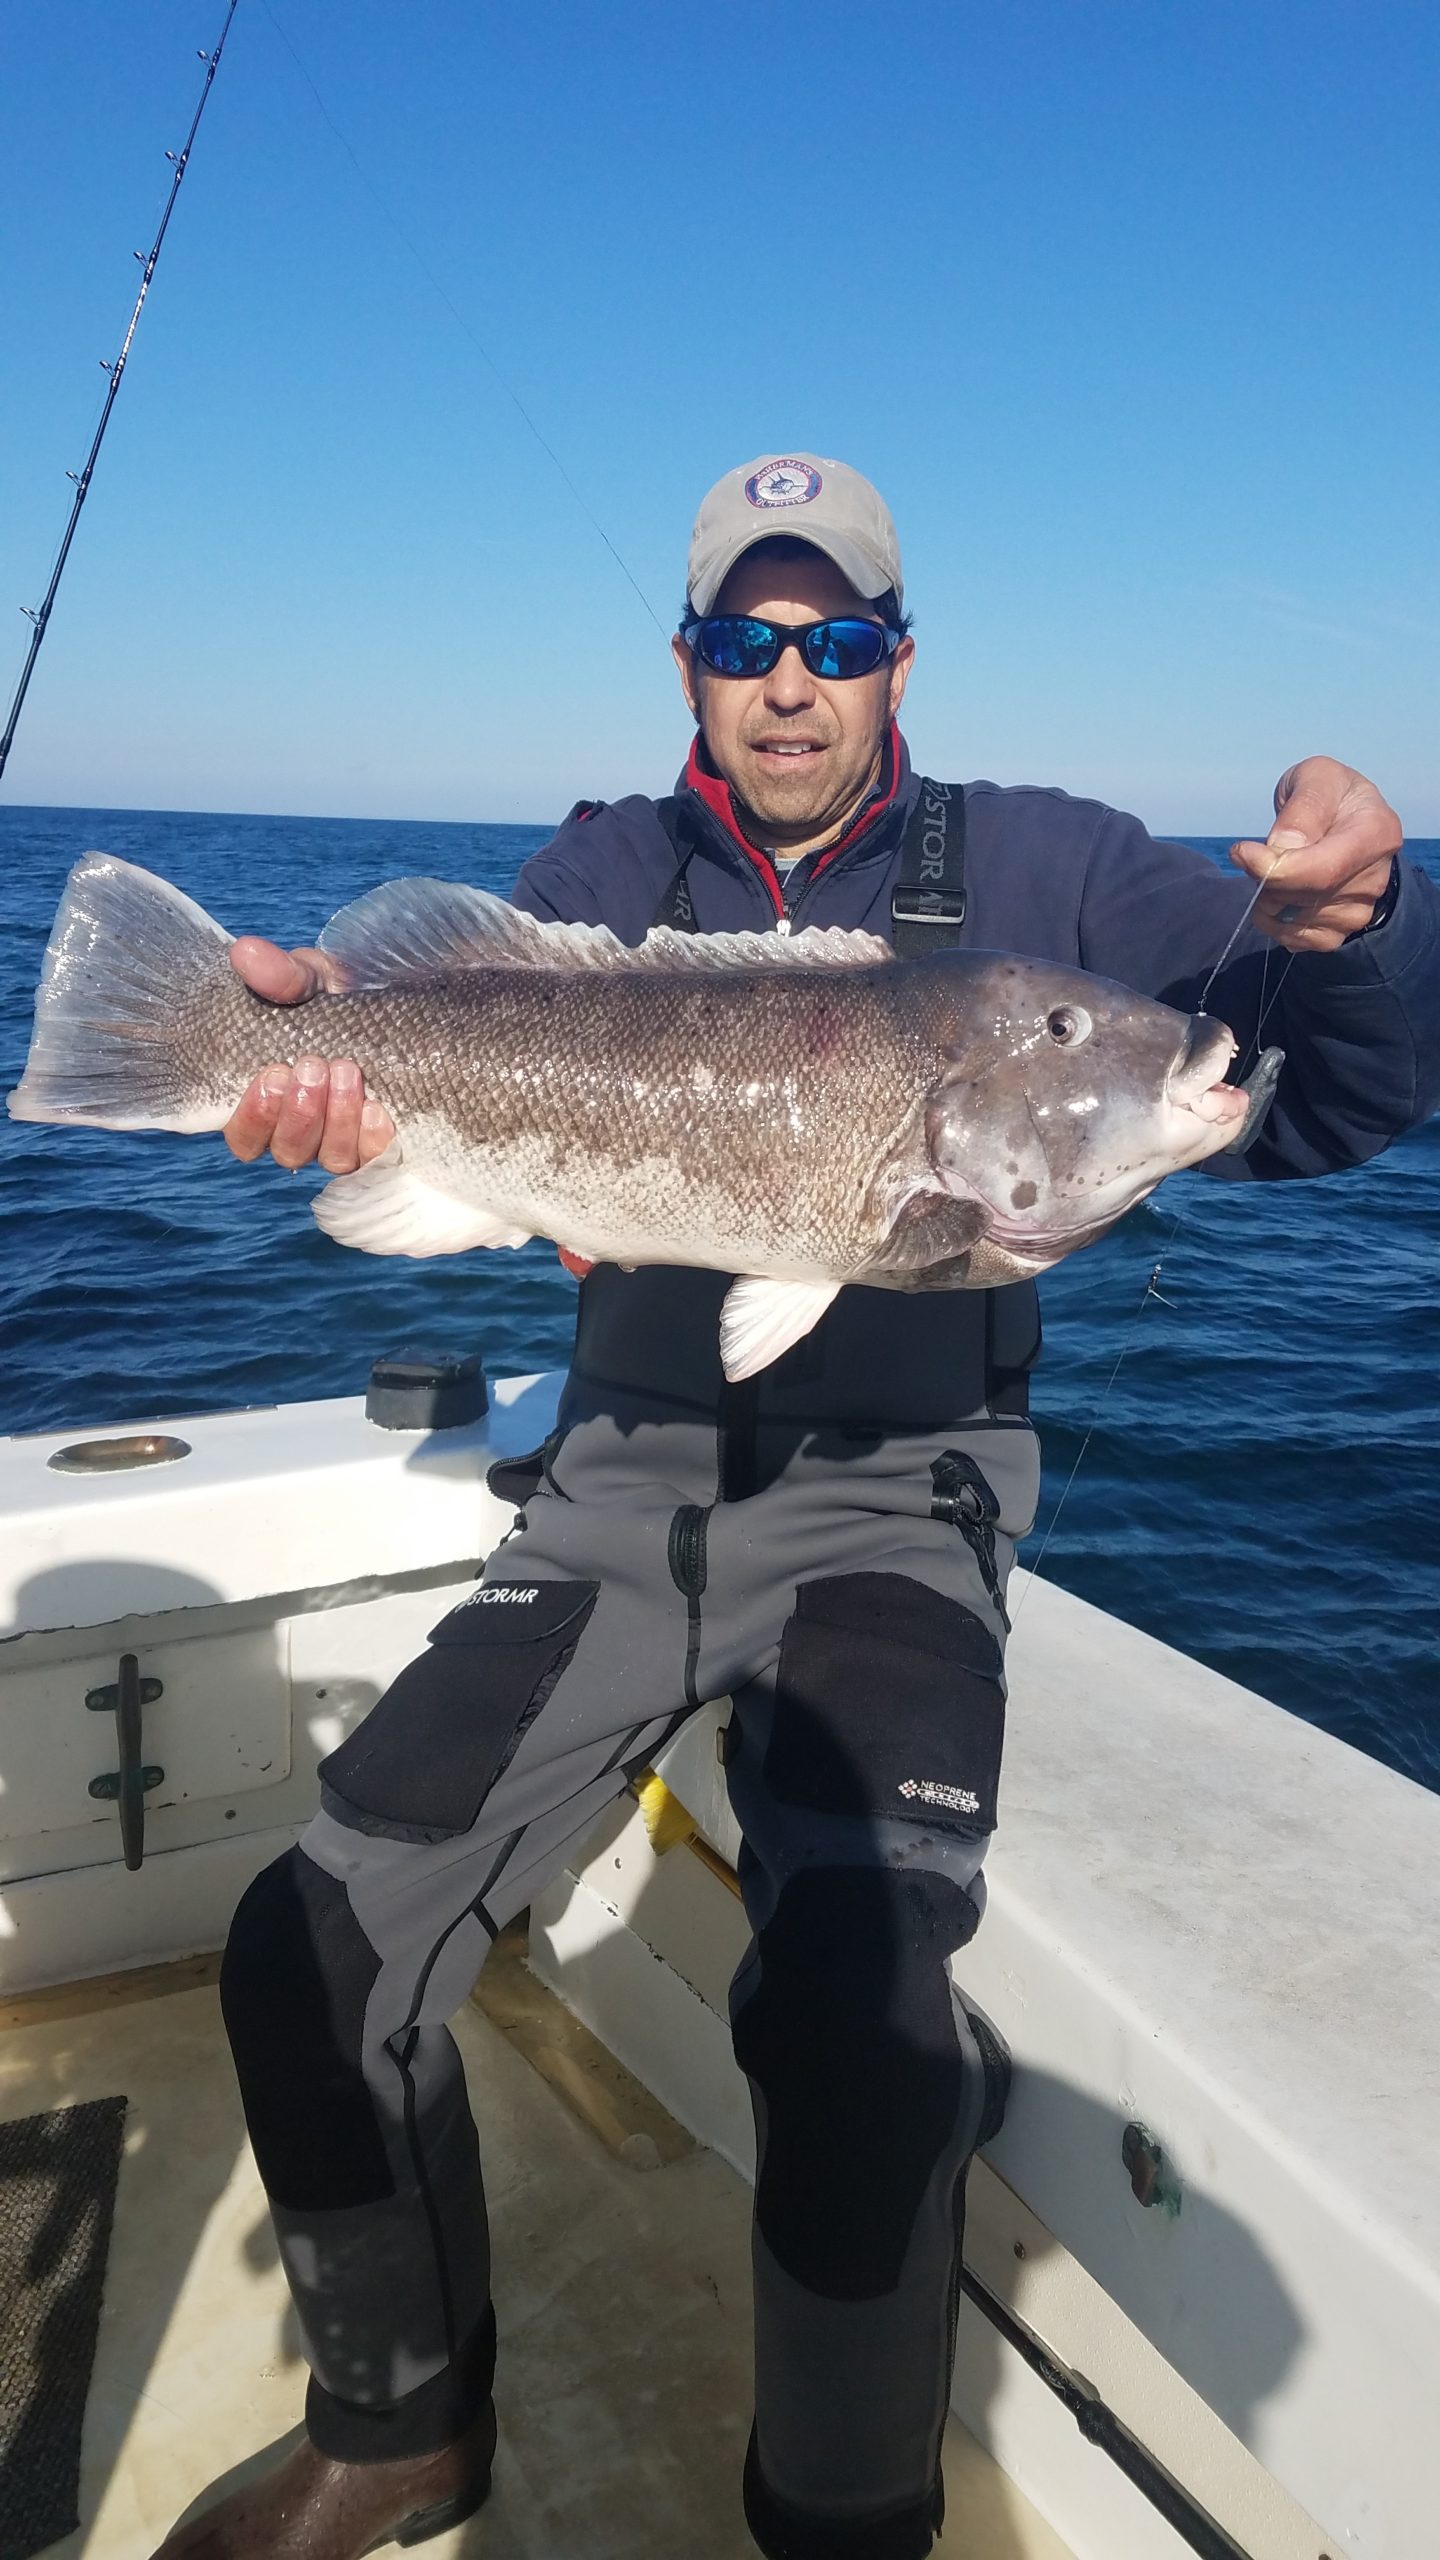 George Pharoah of Sag Harbor helped this 10.4 pound blackfish mugged for the camera and then released him. George was fishing aboard the Blue Fin IV last week, the final week of a great blackfish season. 